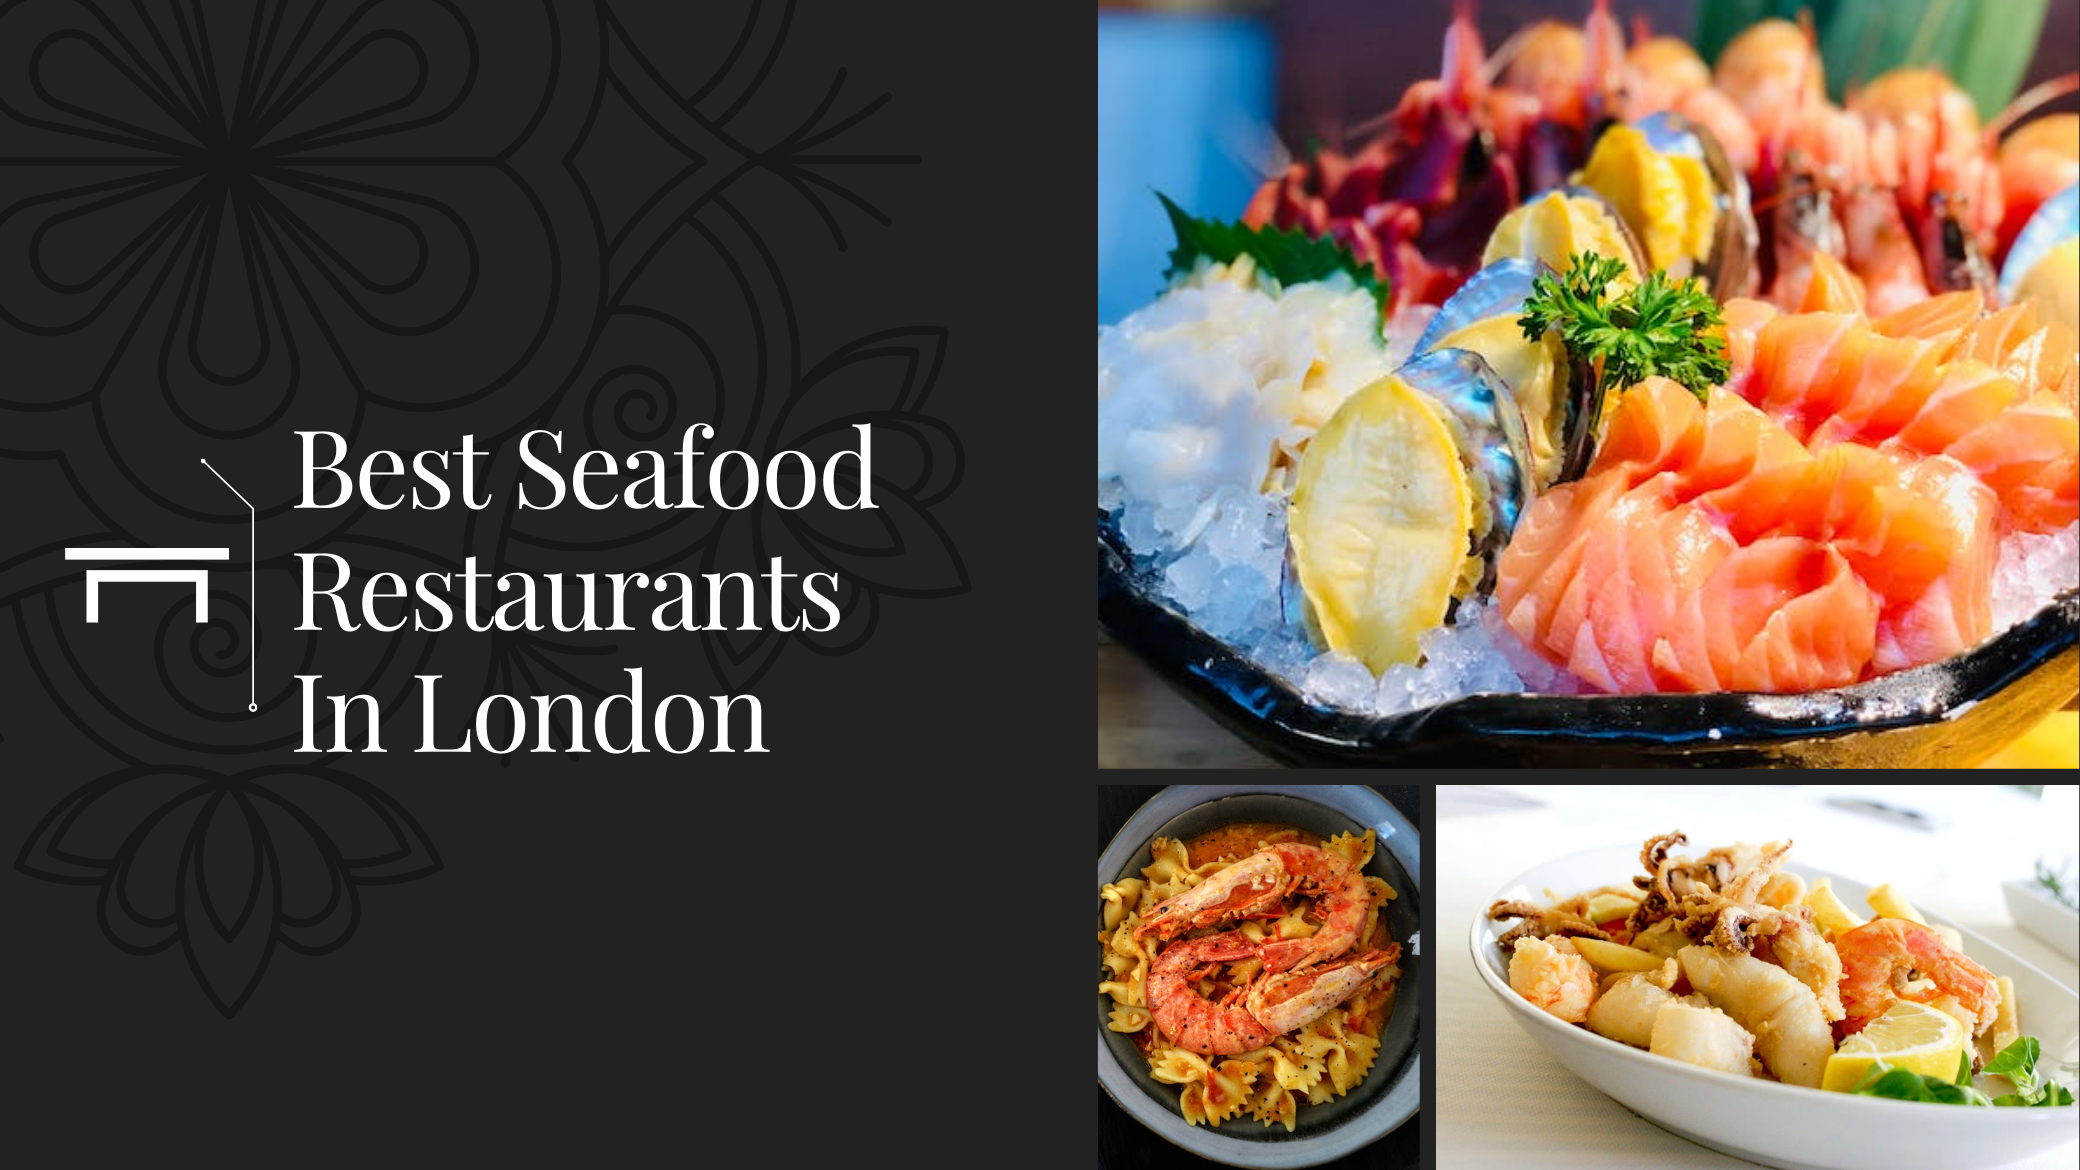 The Best Seafood Restaurants in London